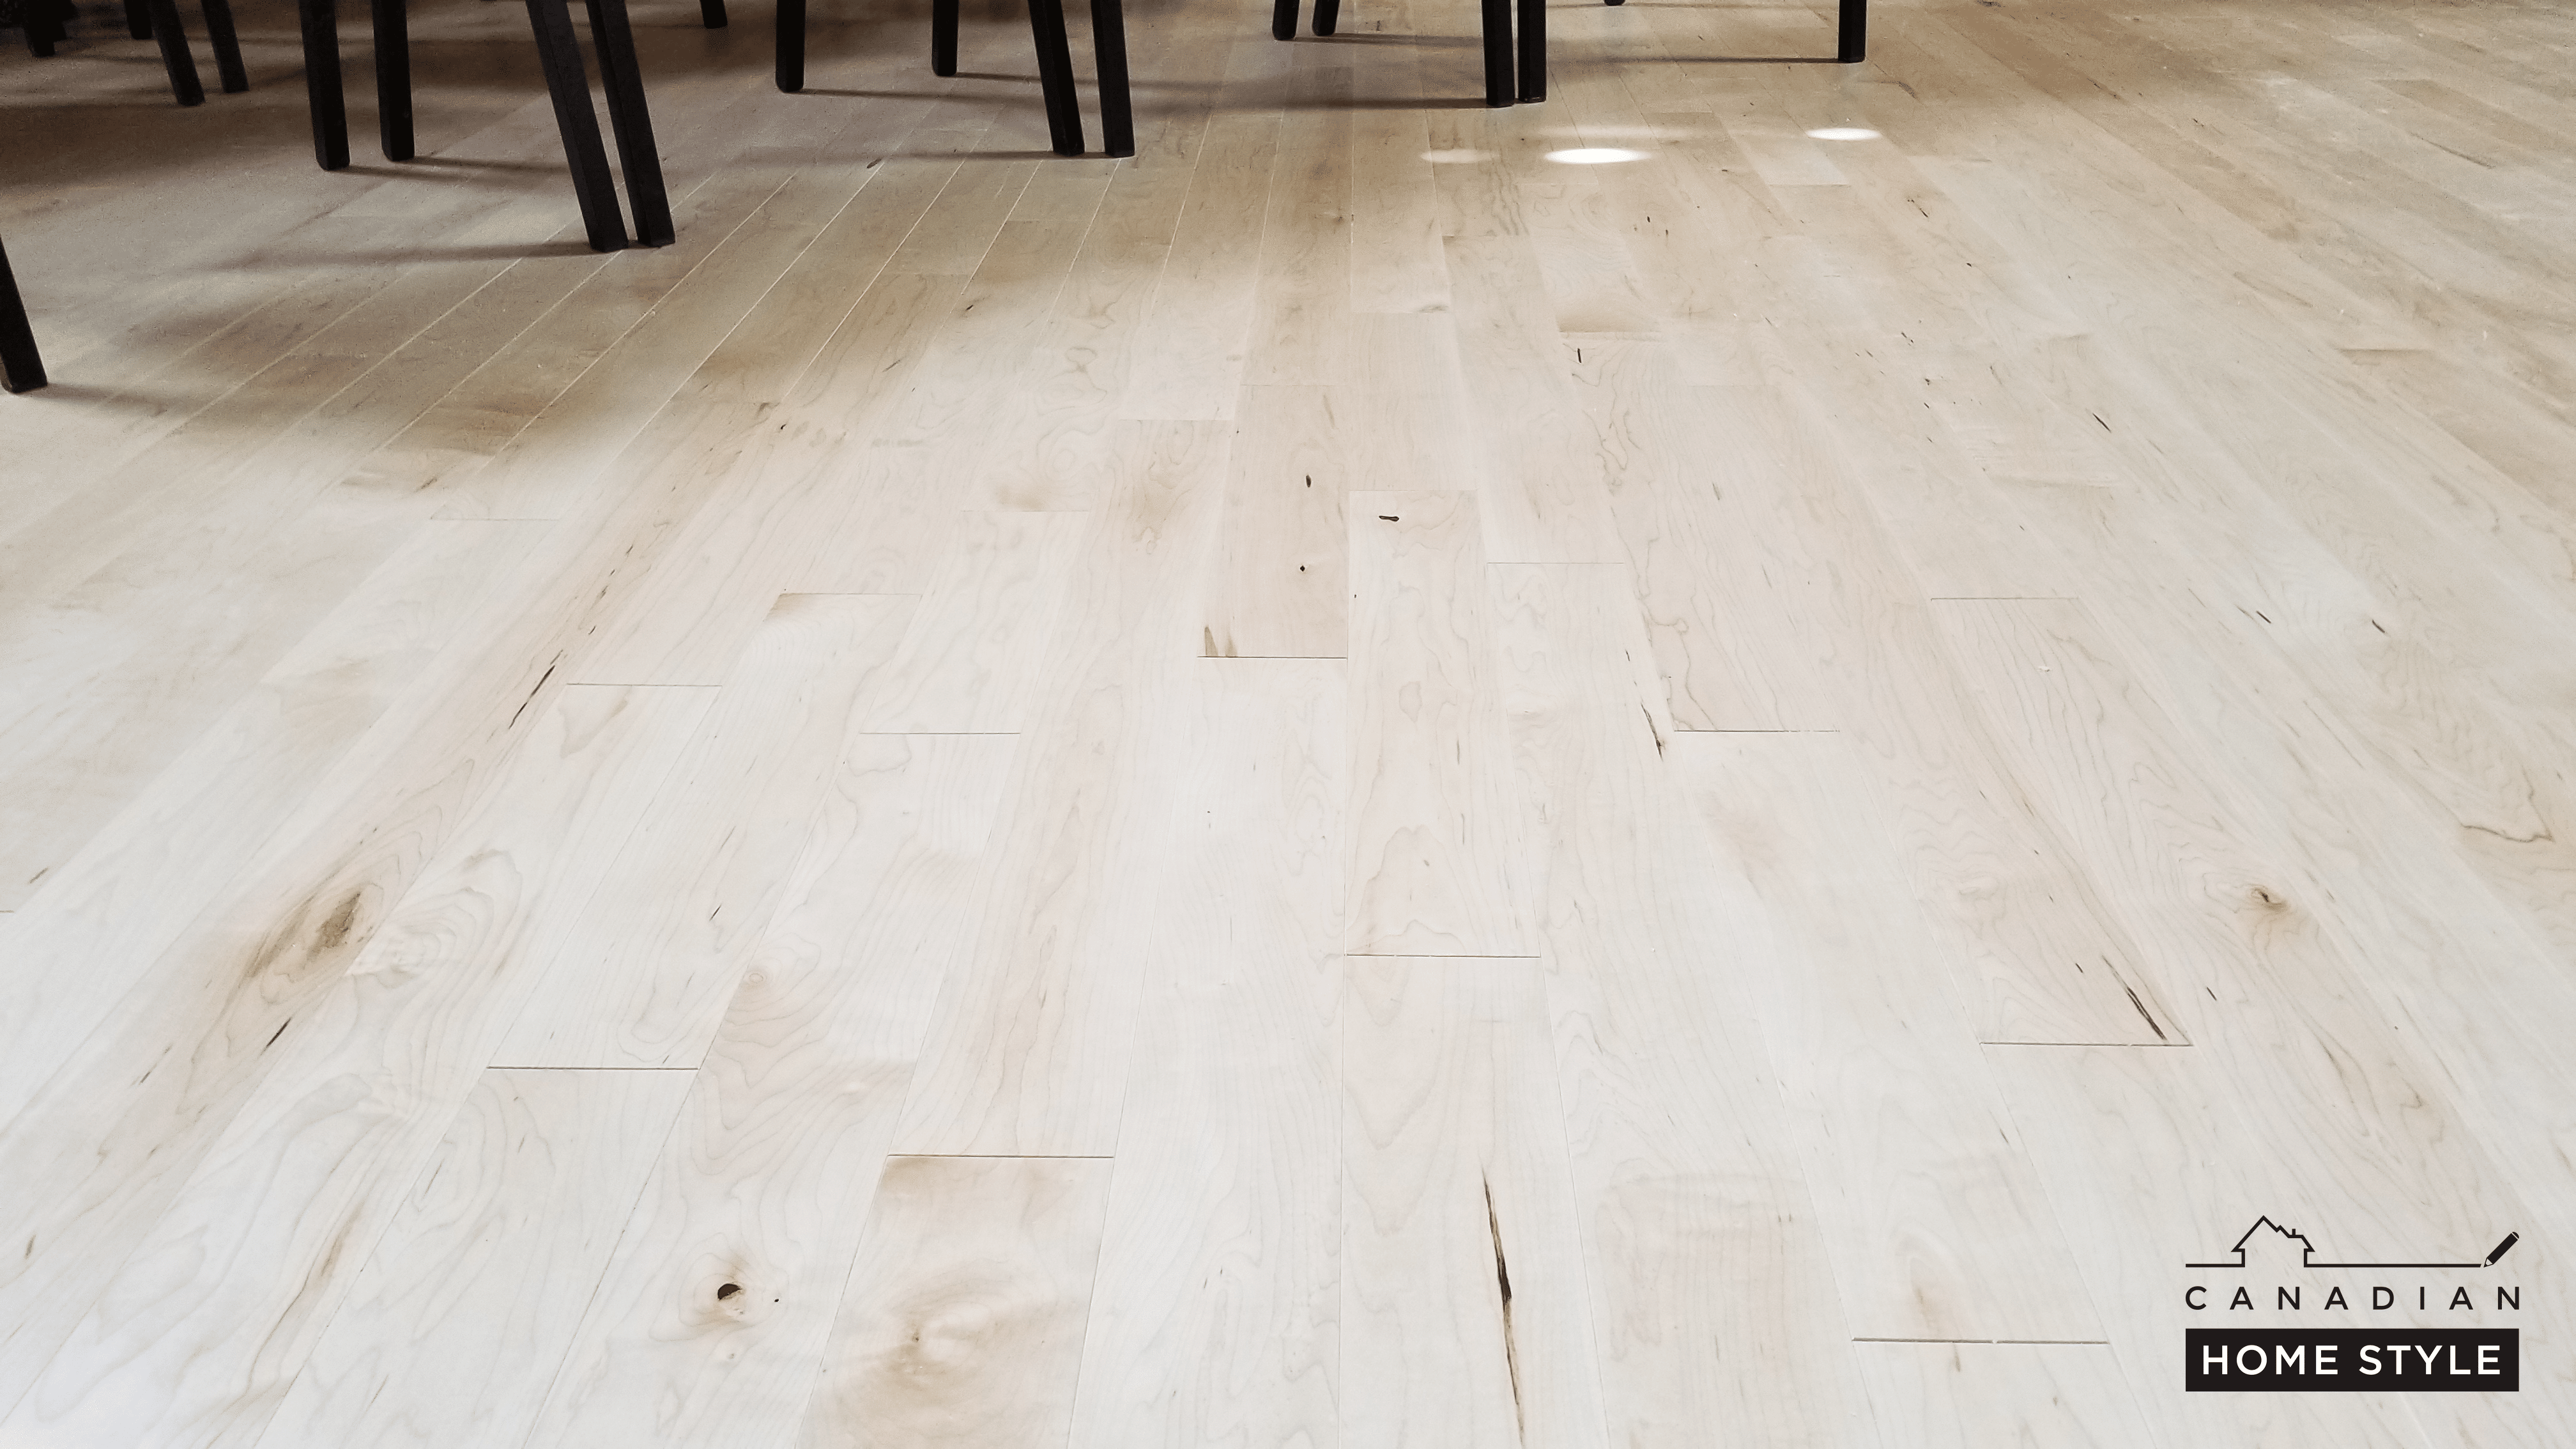 Transform your home with a beautiful new wood floor